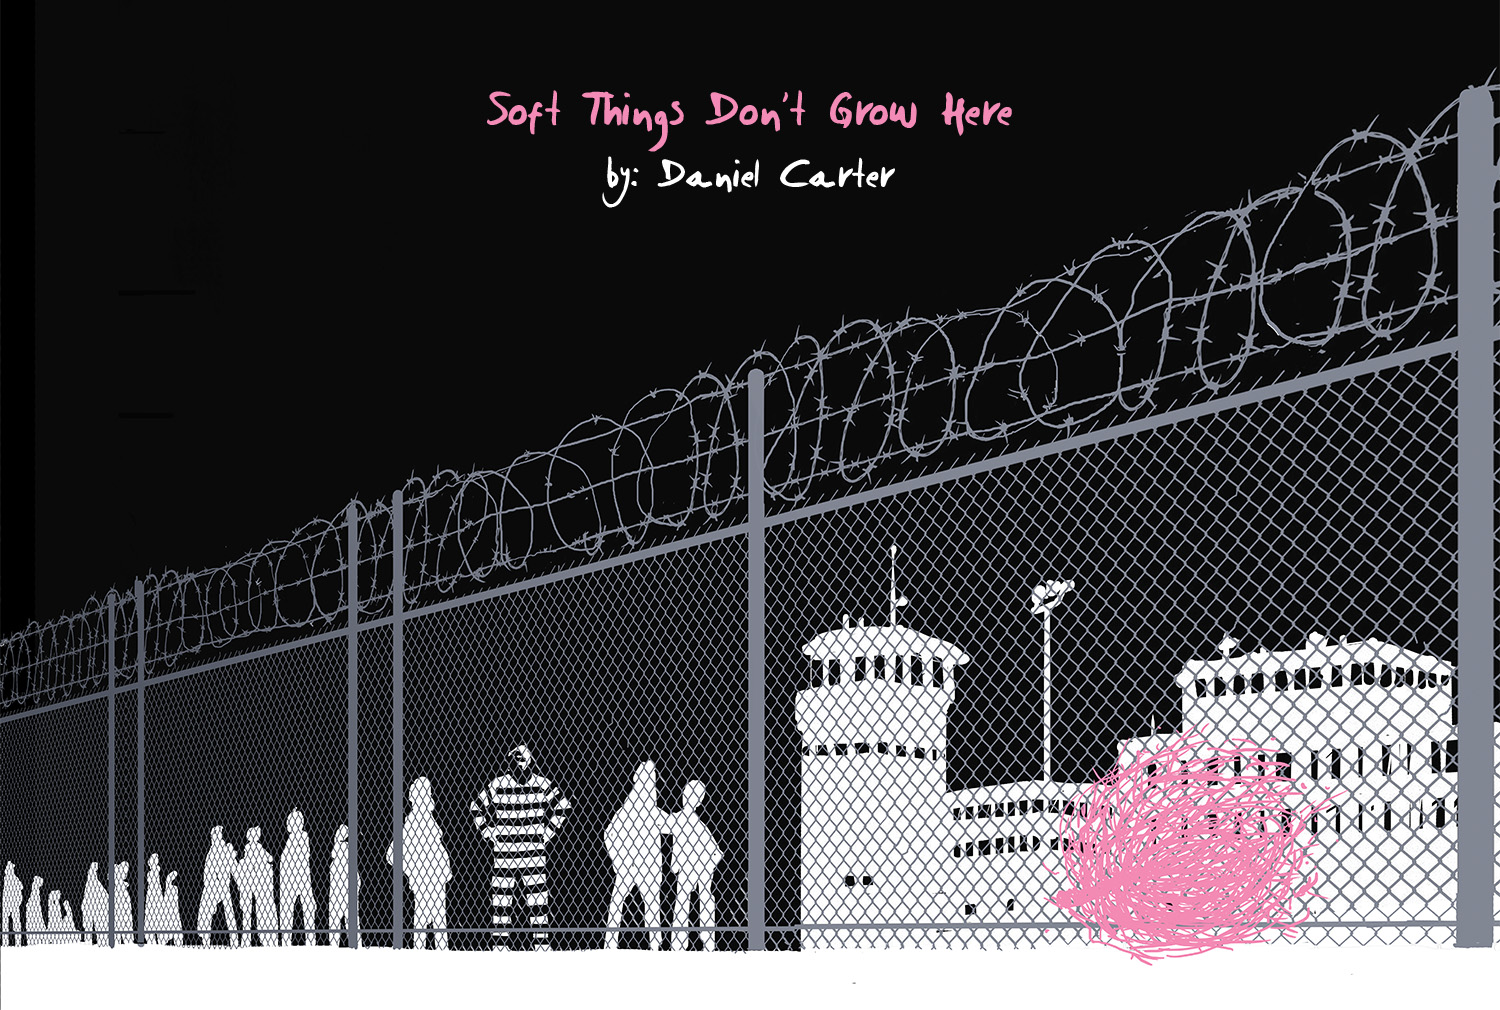 Soft Things Don't Grow Here, by Daniel Carter